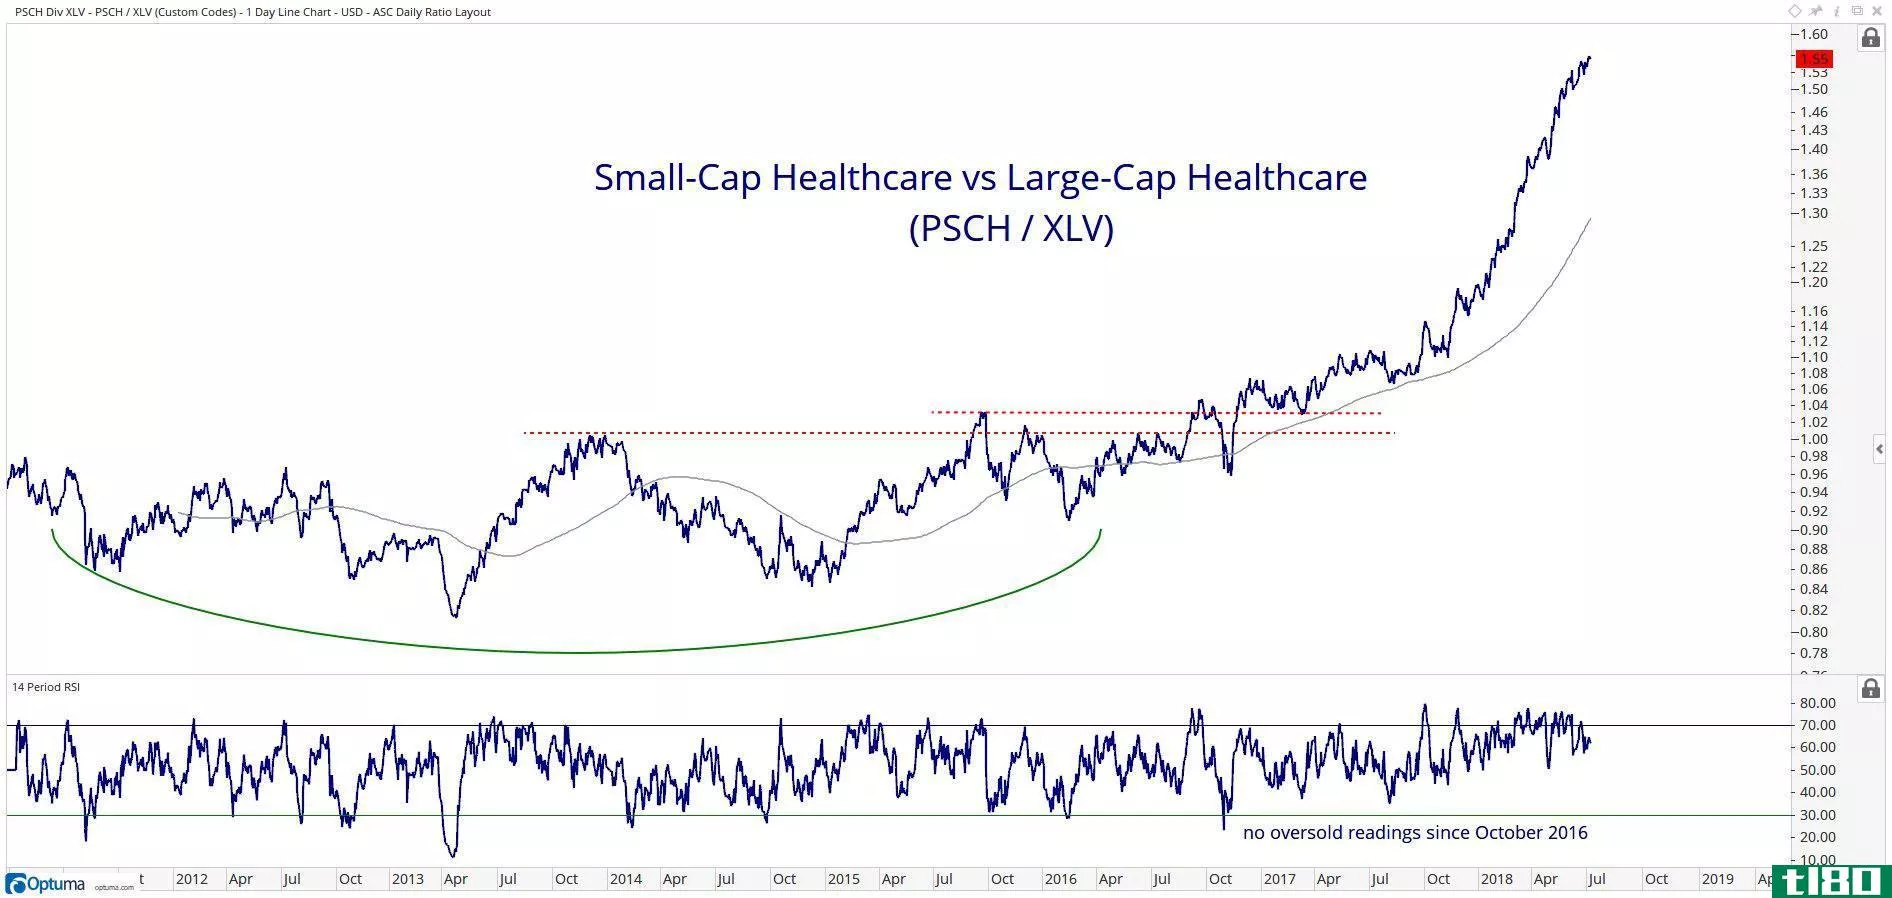 Chart showing performance of Invesco S&P SmallCap Health Care ETF (PSCH) vs. Health Care Select Sector SPDR ETF (XLV)